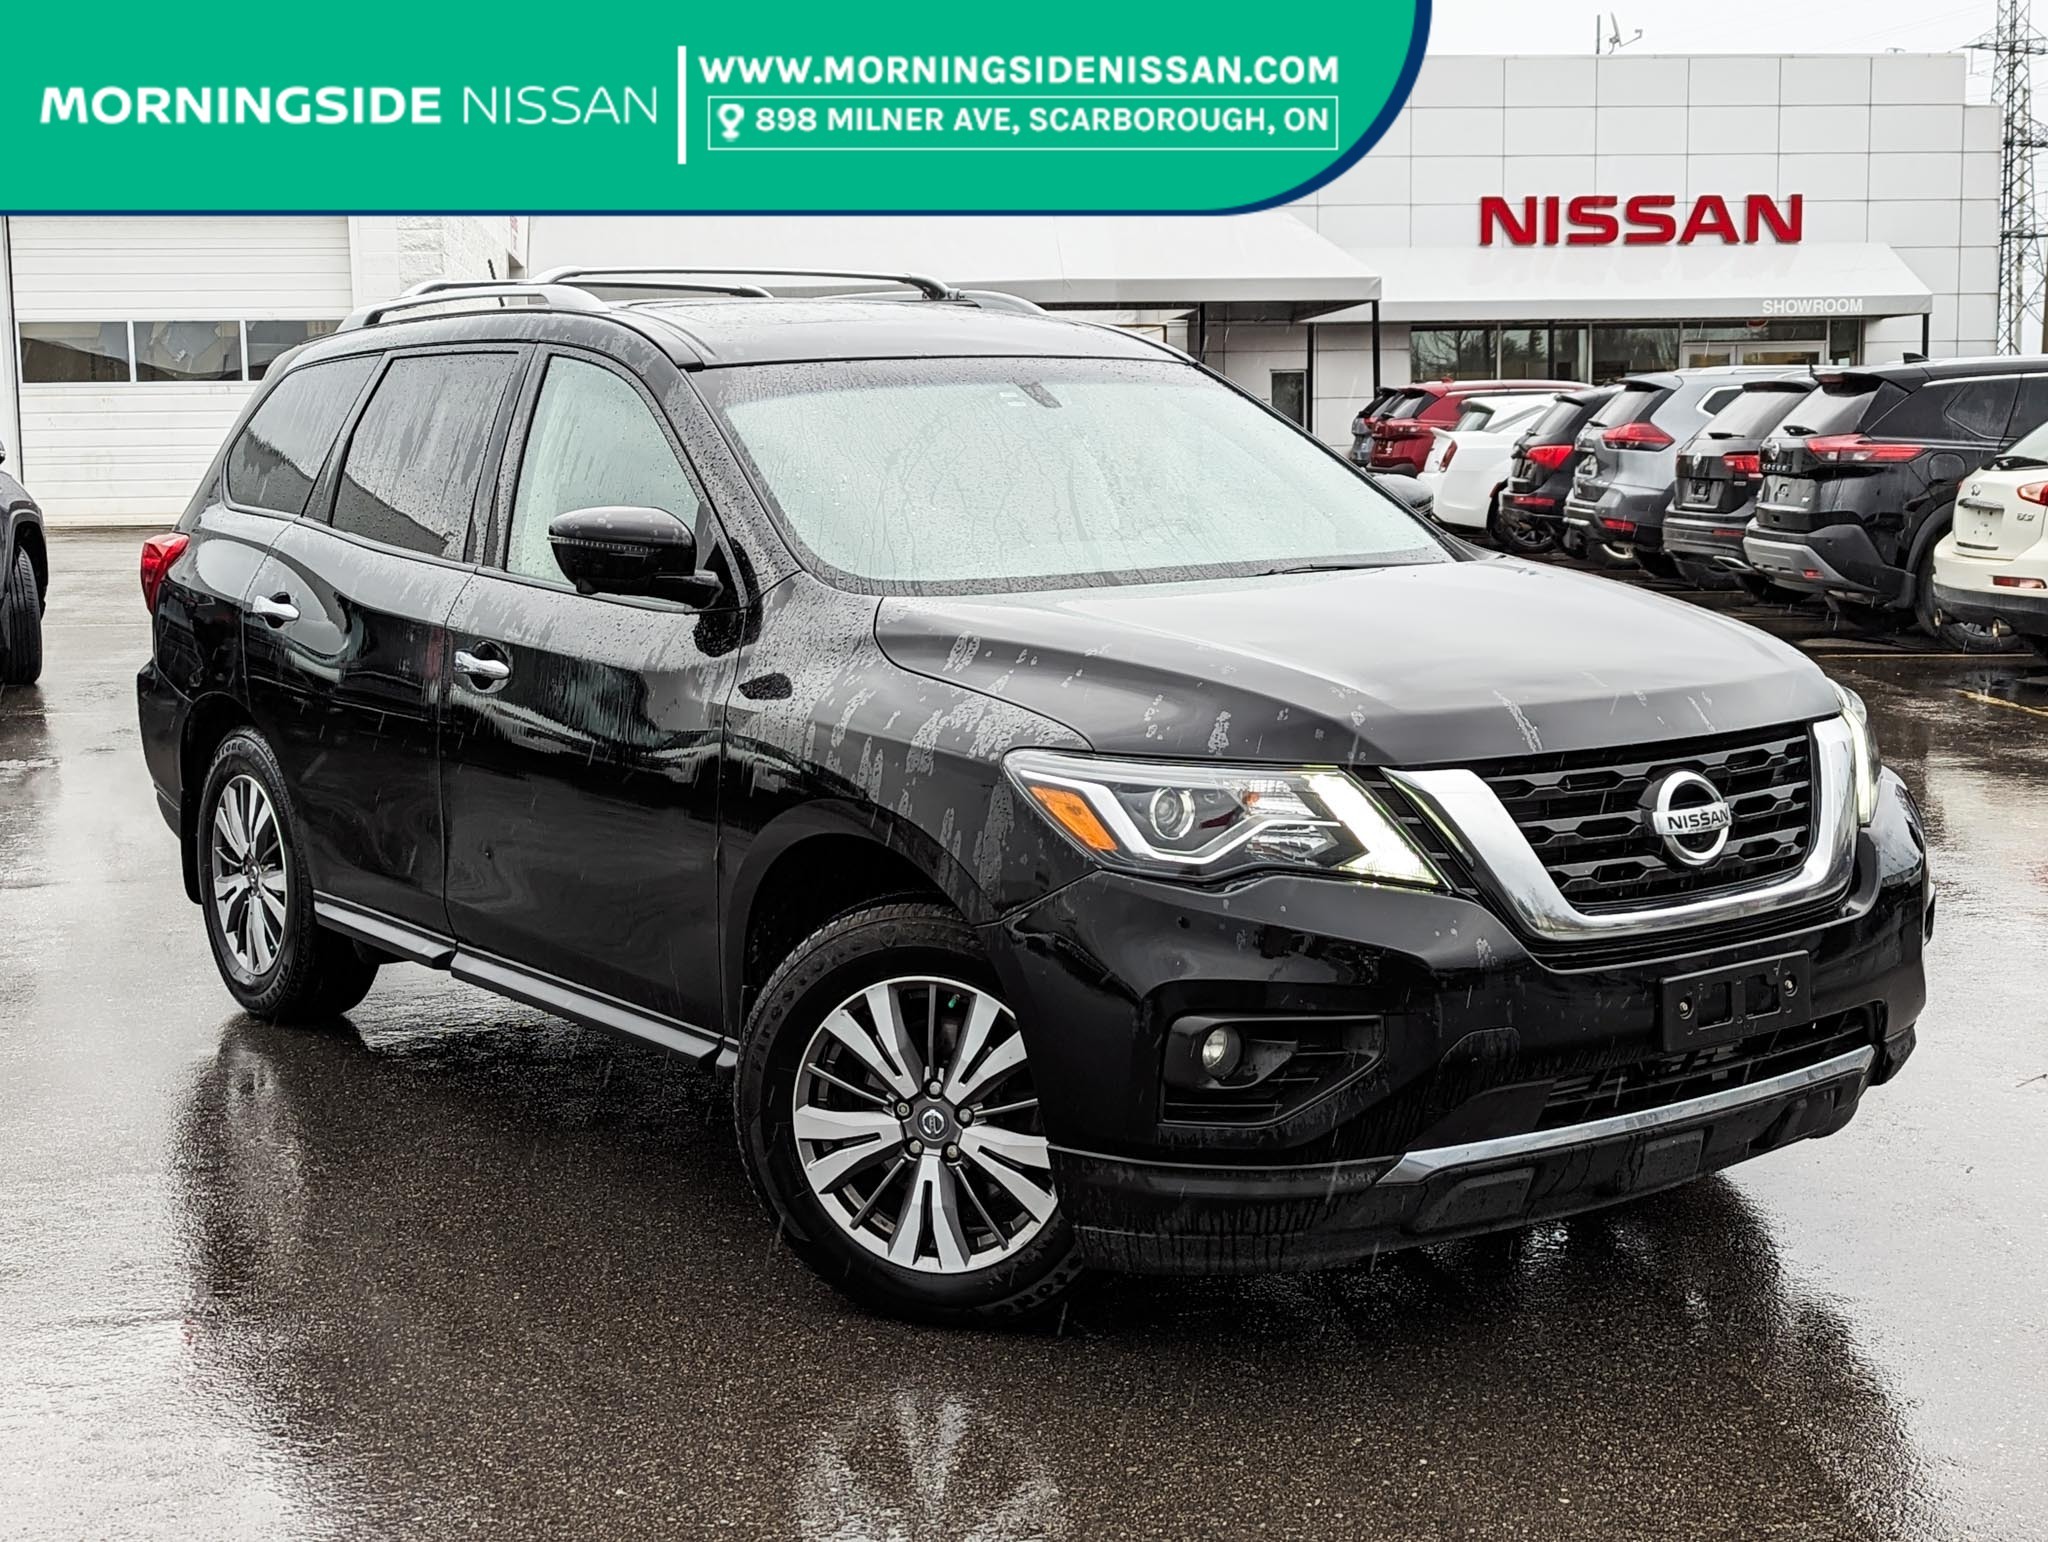 2018 Nissan Pathfinder NO ACCIDENT| LEATHER |GPS|